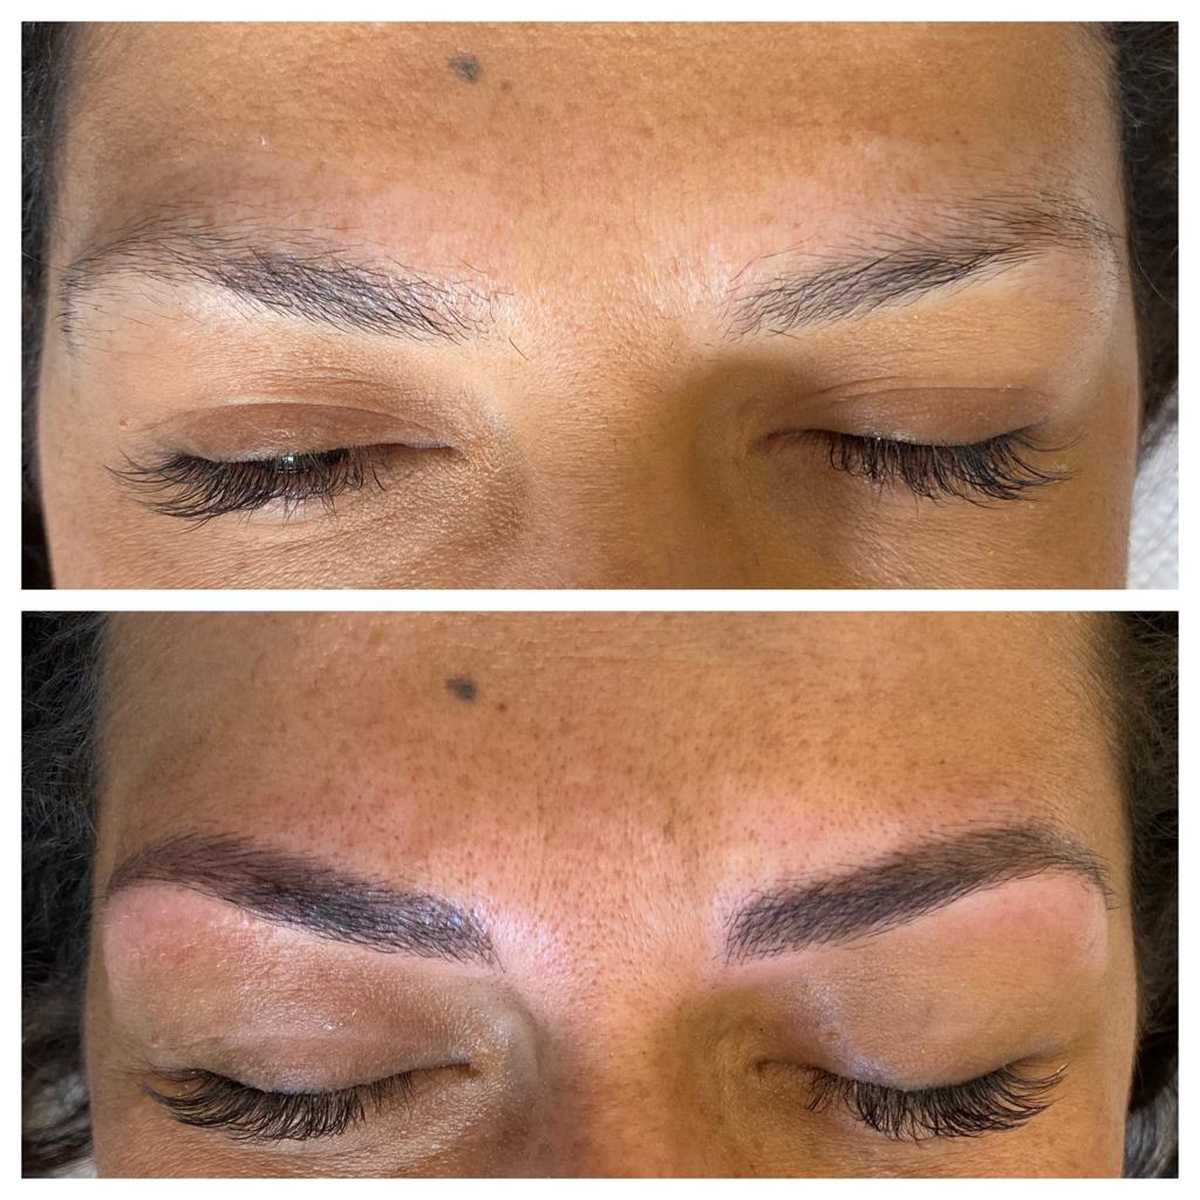 Image of before and after eyebrow tattoo